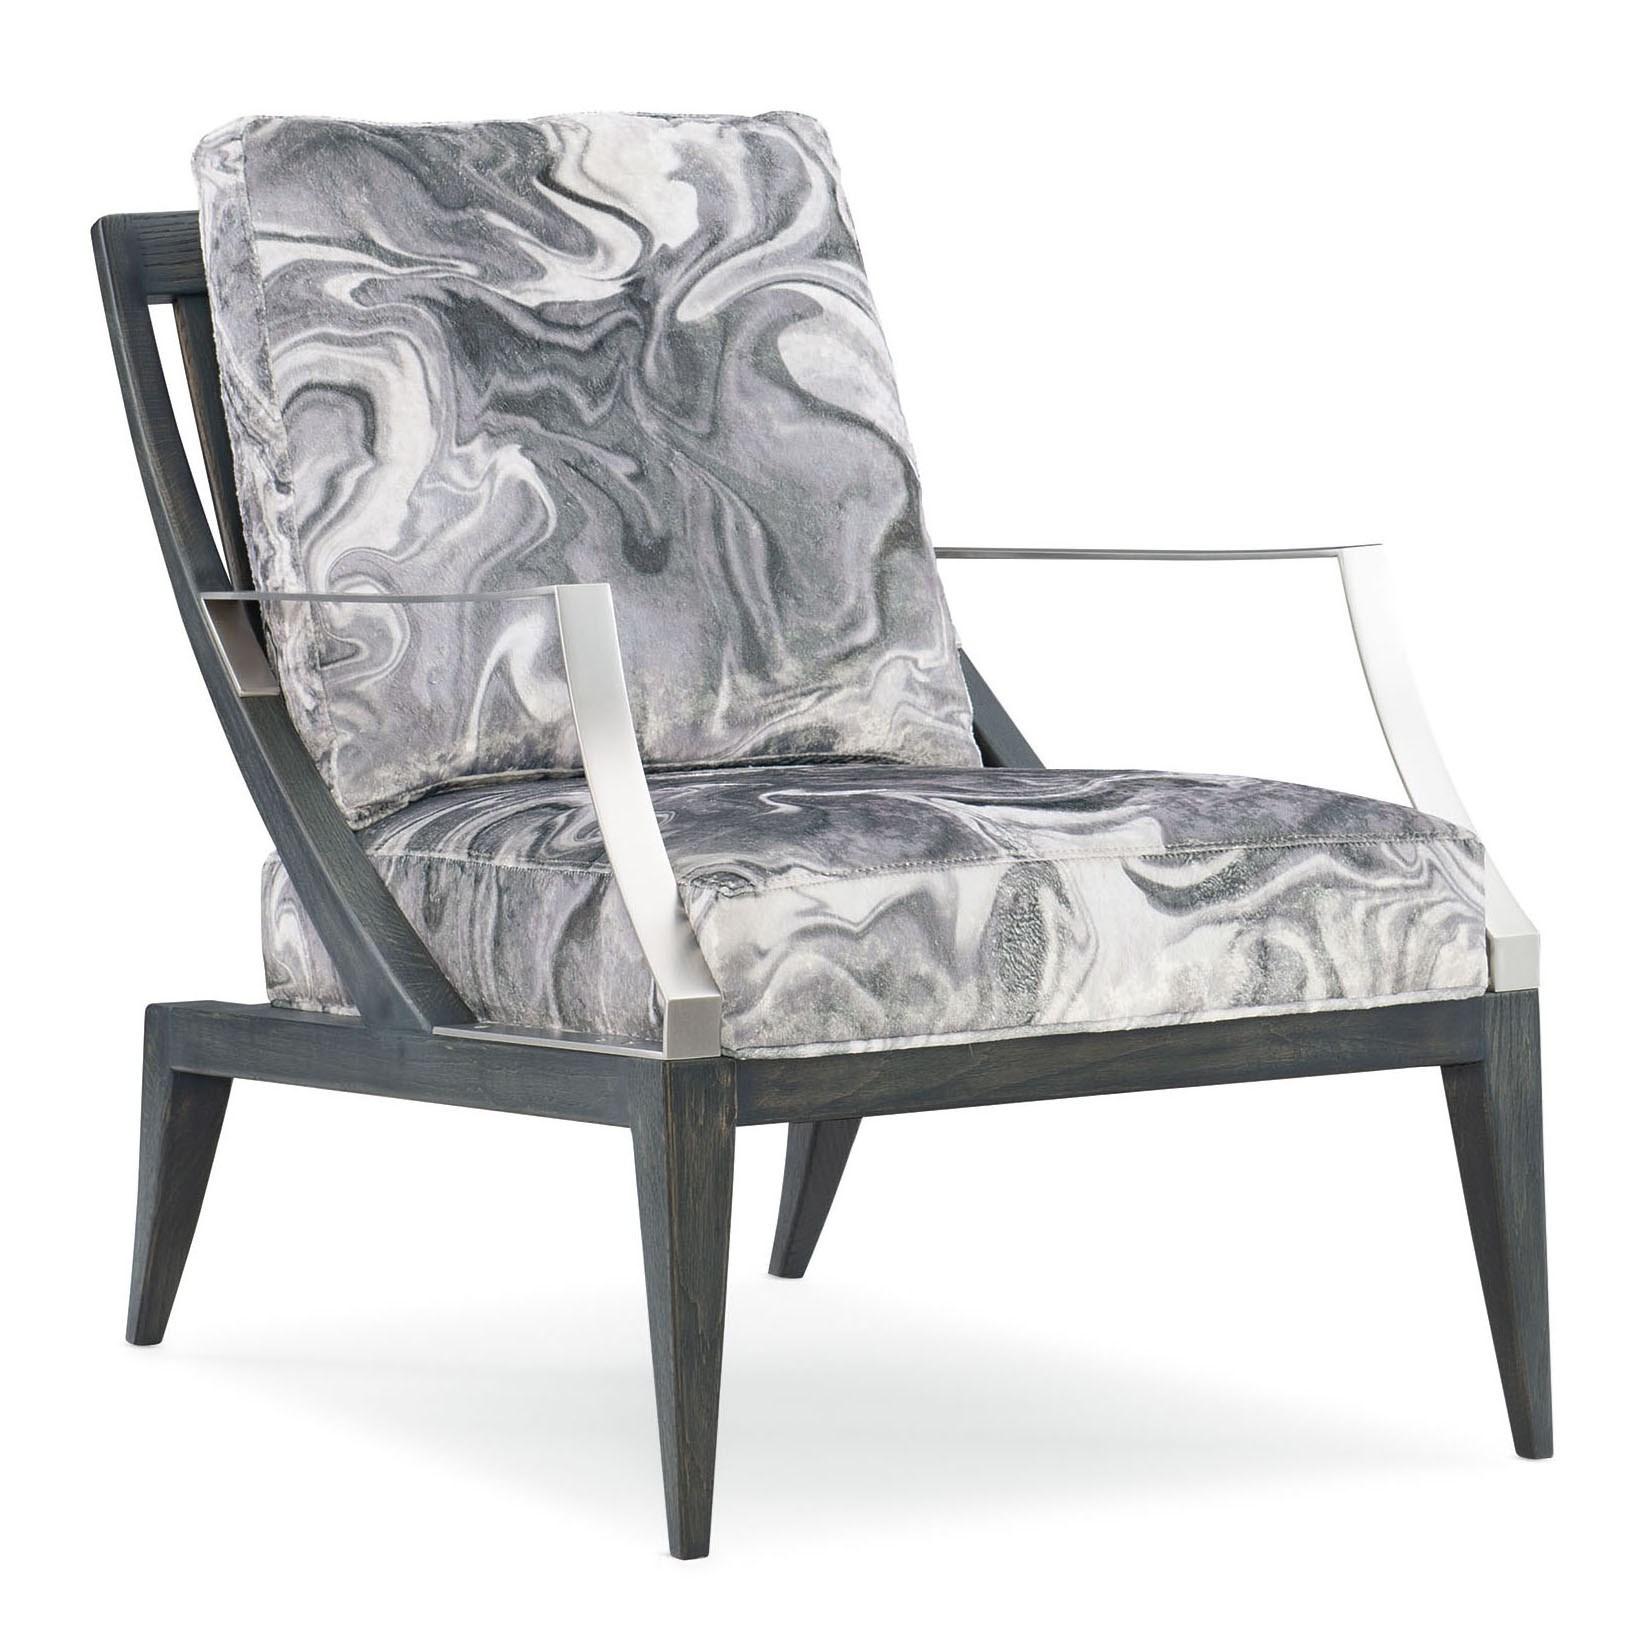 Modern Accent Chair REPETITION CHAIR M120-420-132-A in Multi-Toned Fabric